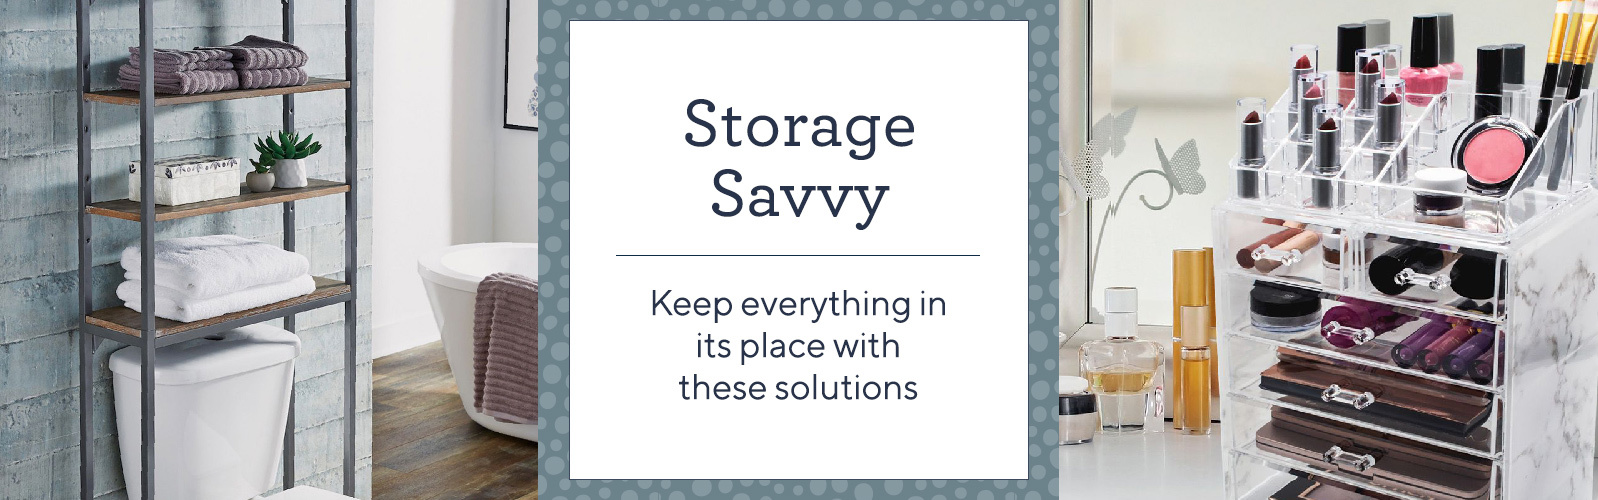 Storage Savvy  Keep everything in its place with these solutions